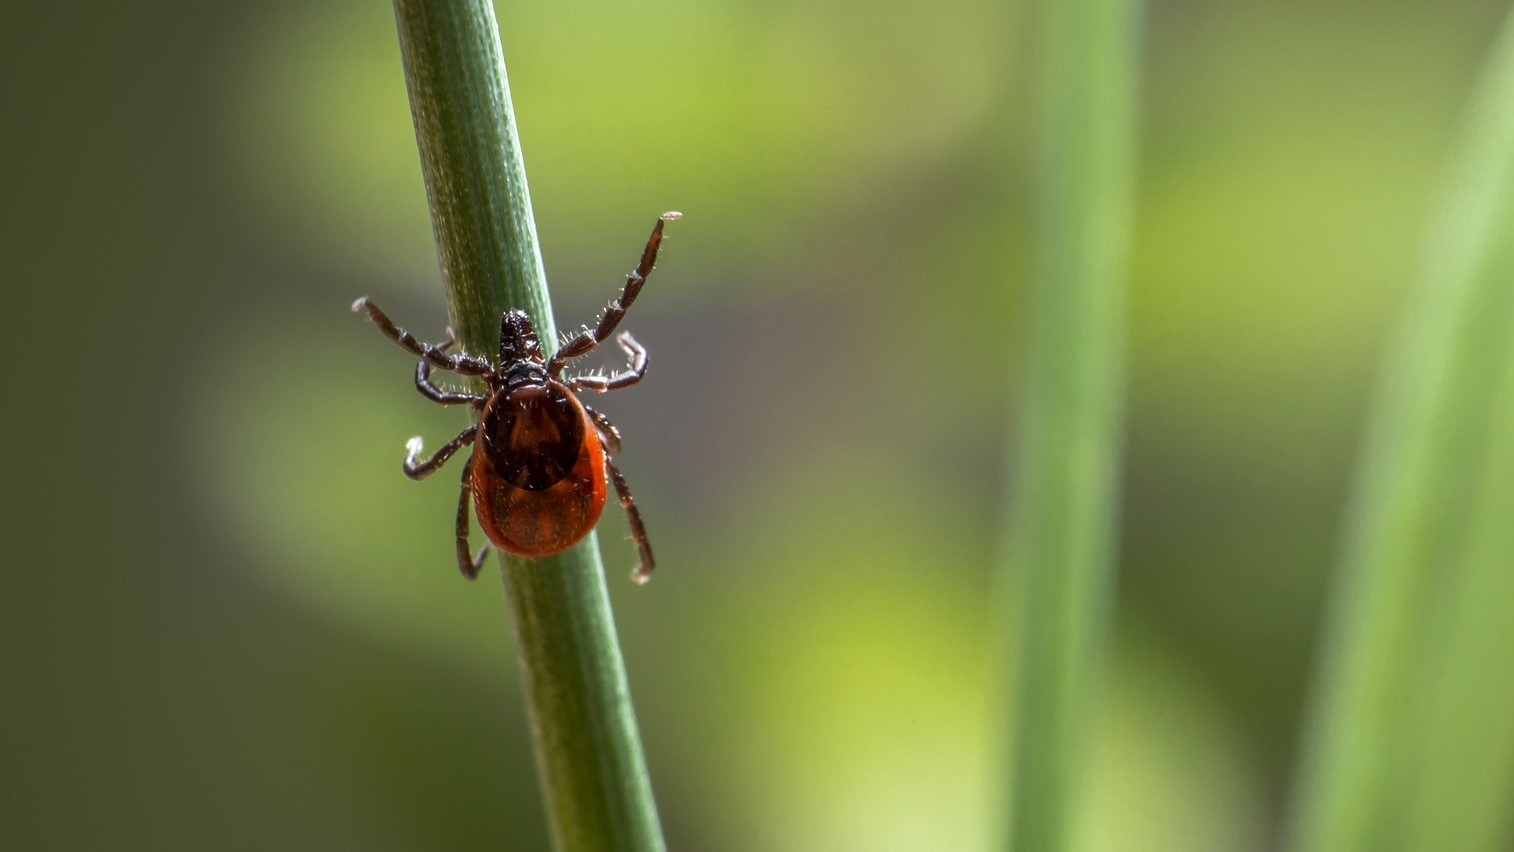 Assessing the Risk of Lyme Disease